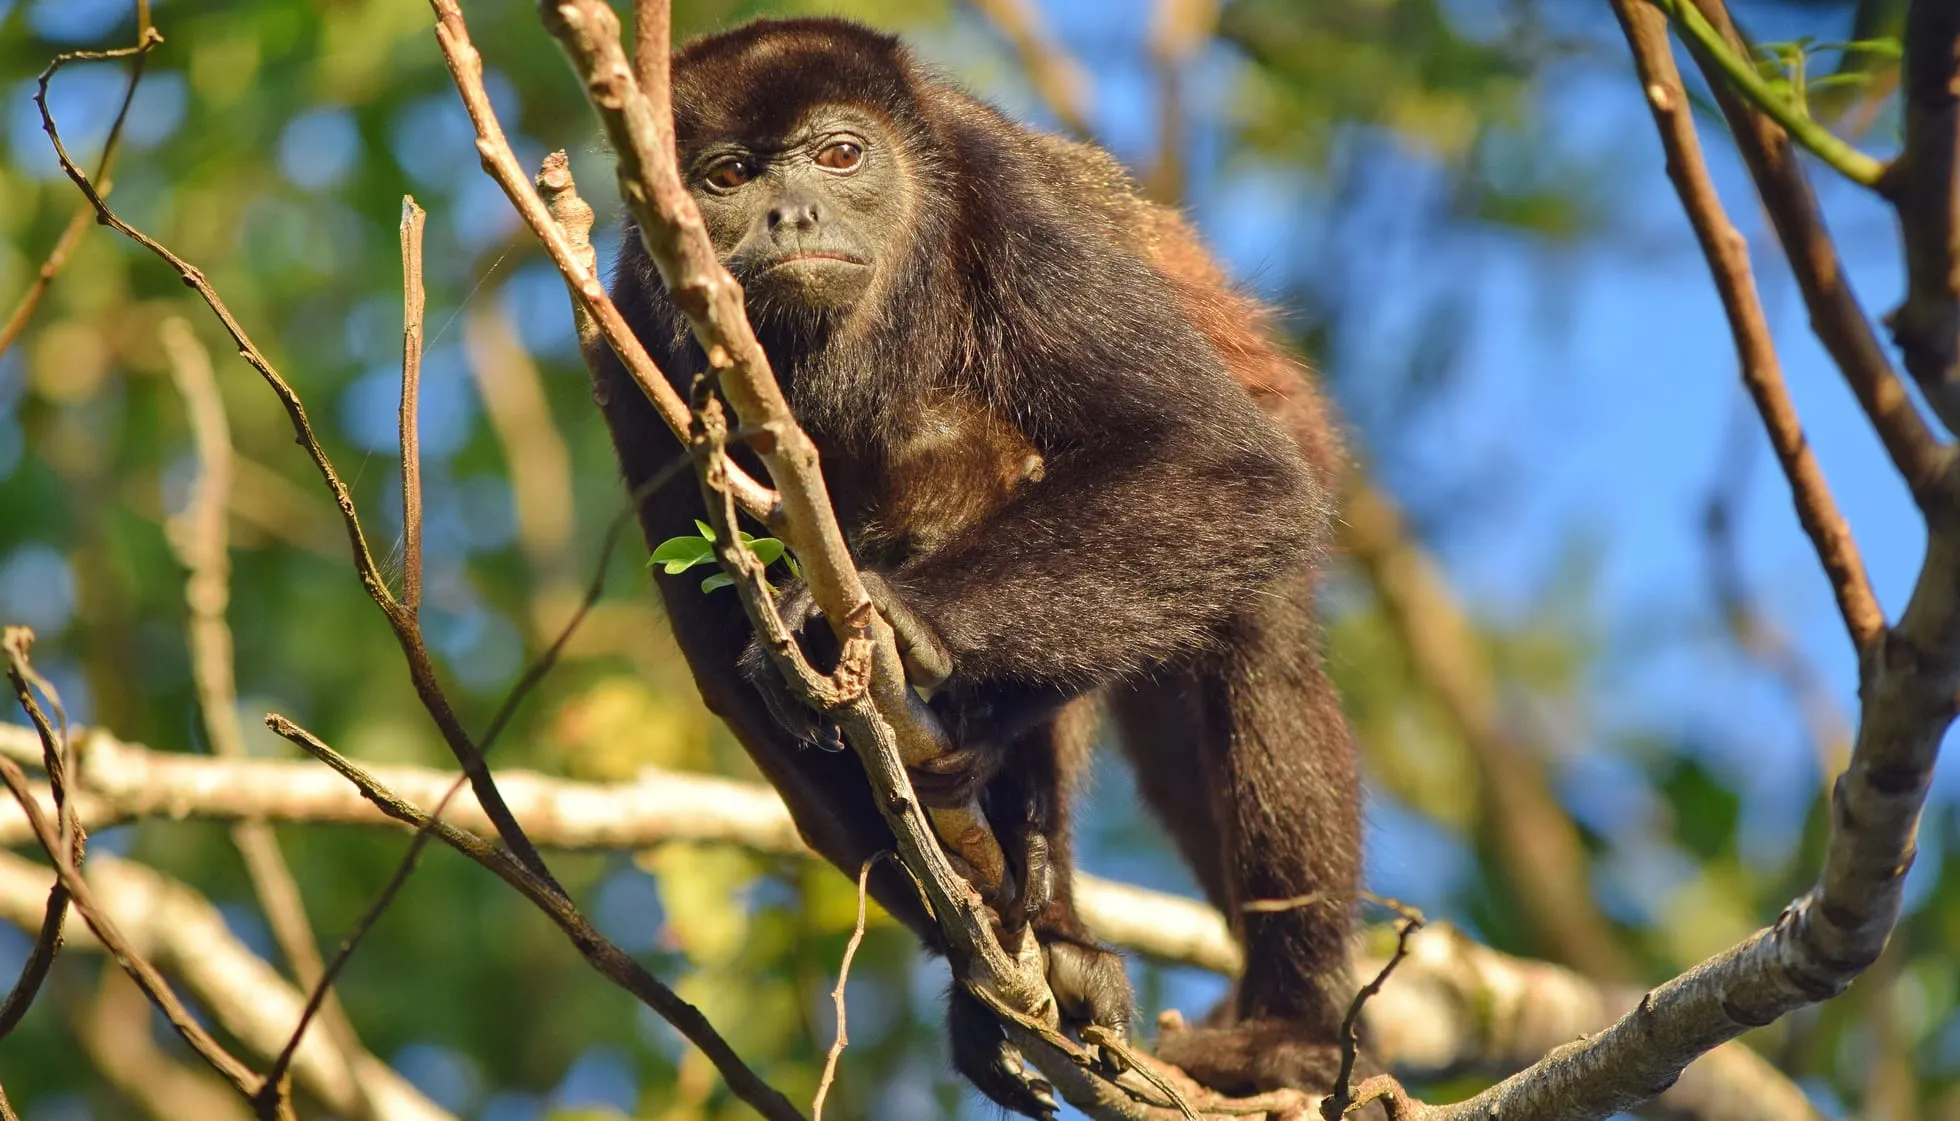 Mantled howler monkey on a branch